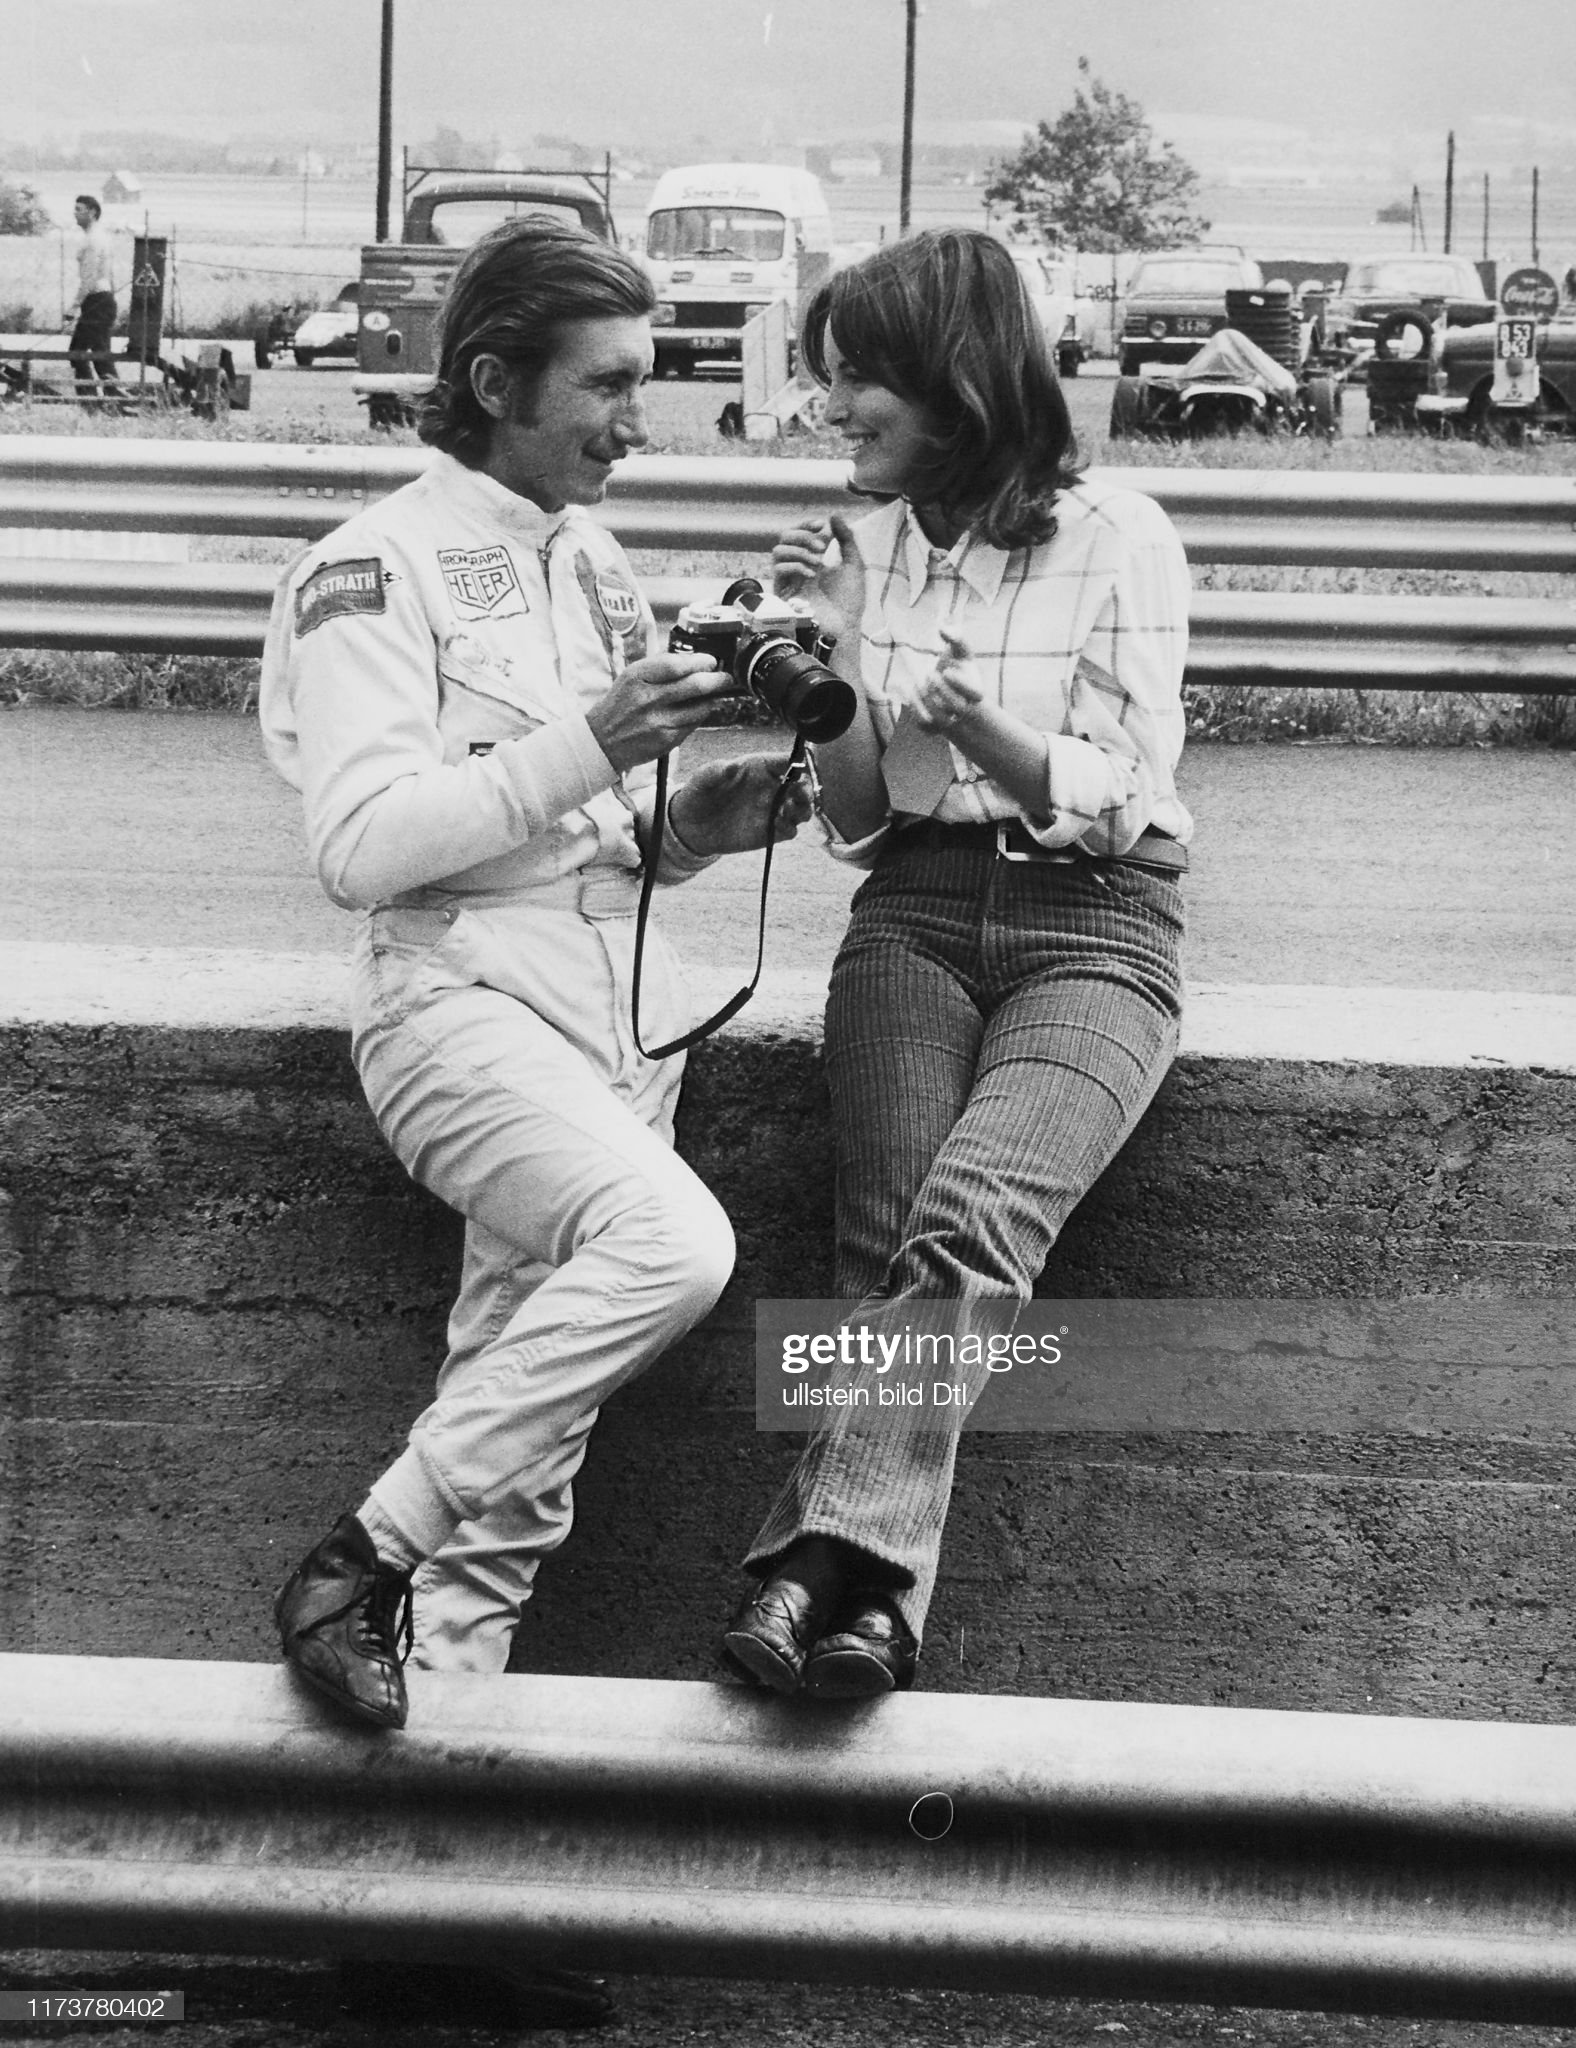 Jo Siffert with wife of Jacky Ickx on July 01, 1970.